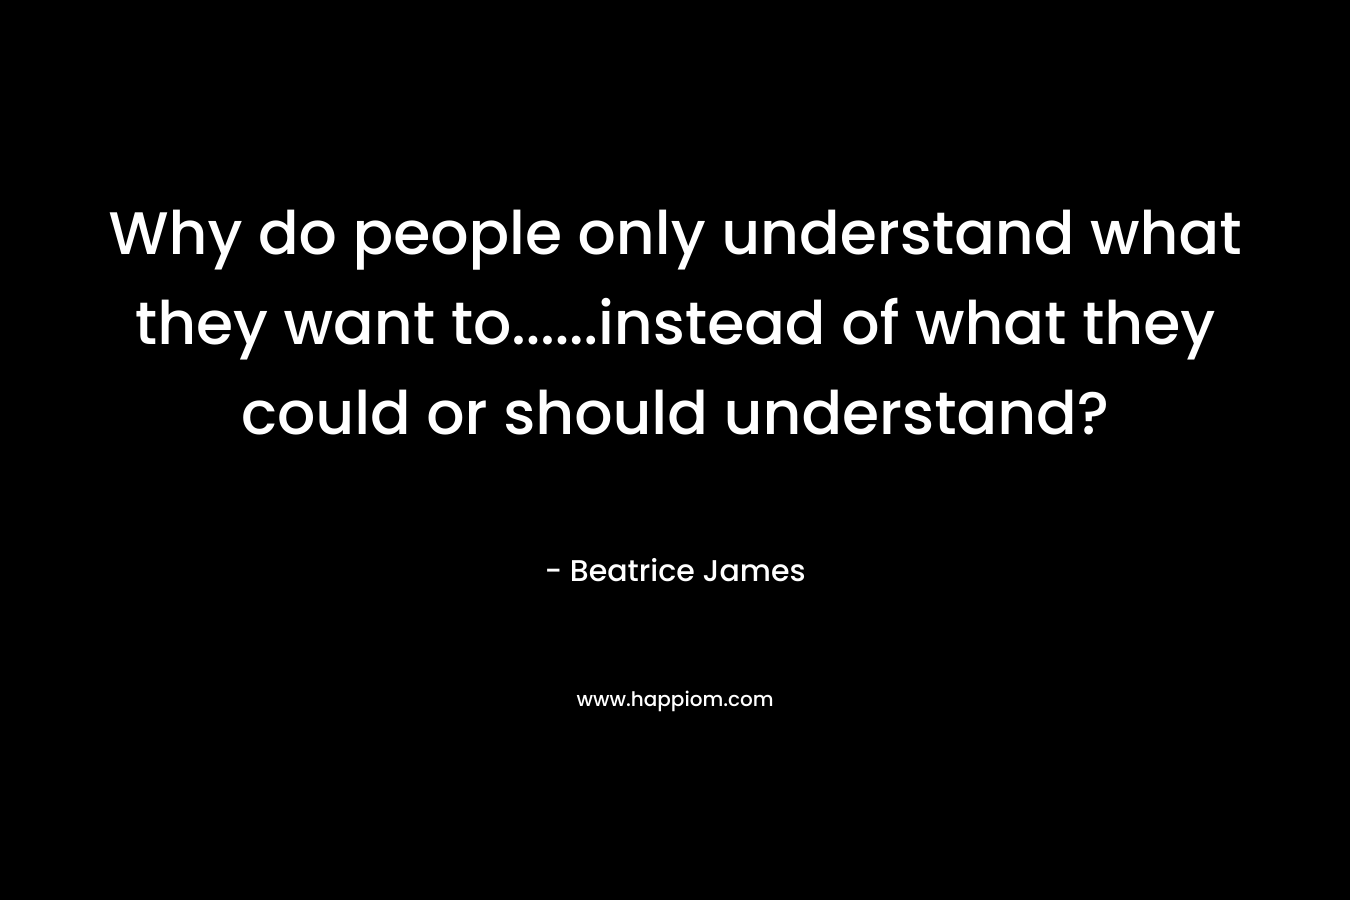 Why do people only understand what they want to......instead of what they could or should understand?